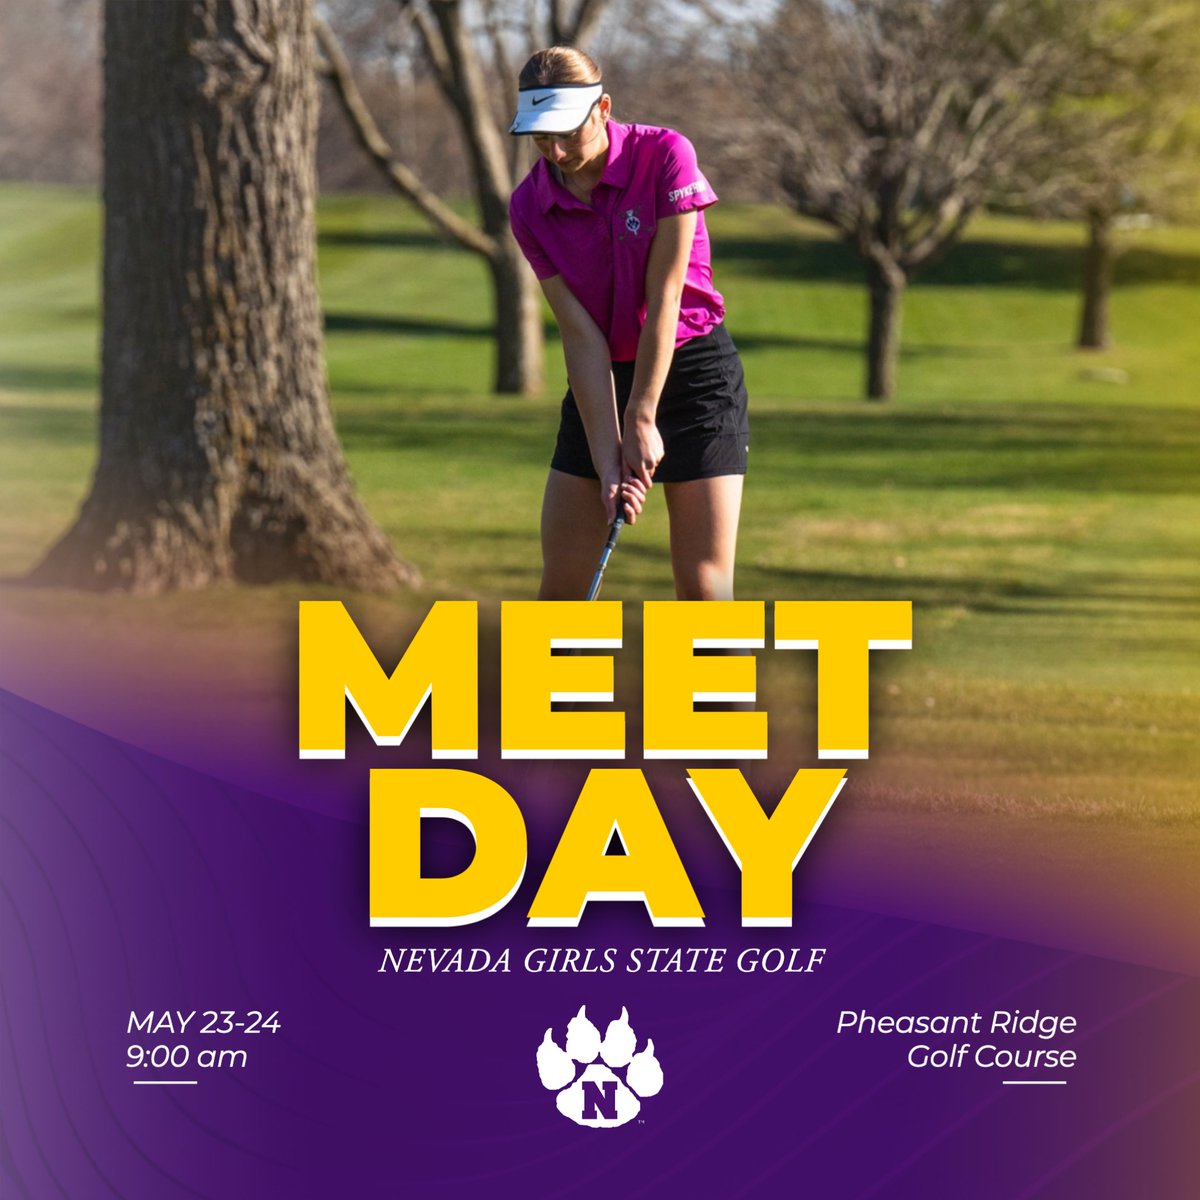 ⛳️ GIRLS STATE GOLF MEETDAY ⛳️

📍 Pheasant Ridge Golf Course - Cedar Falls
🕙 9:00 AM
🎟️ Admission: Online Tickets ONLY - Cashless Entry - Online at: tinyurl.com/StateGGolf
🌭 Concessions: No Information Passed
📺 Live Scoring: tinyurl.com/LiveScoringGolf

#NevadaCubPride #TeamCubs